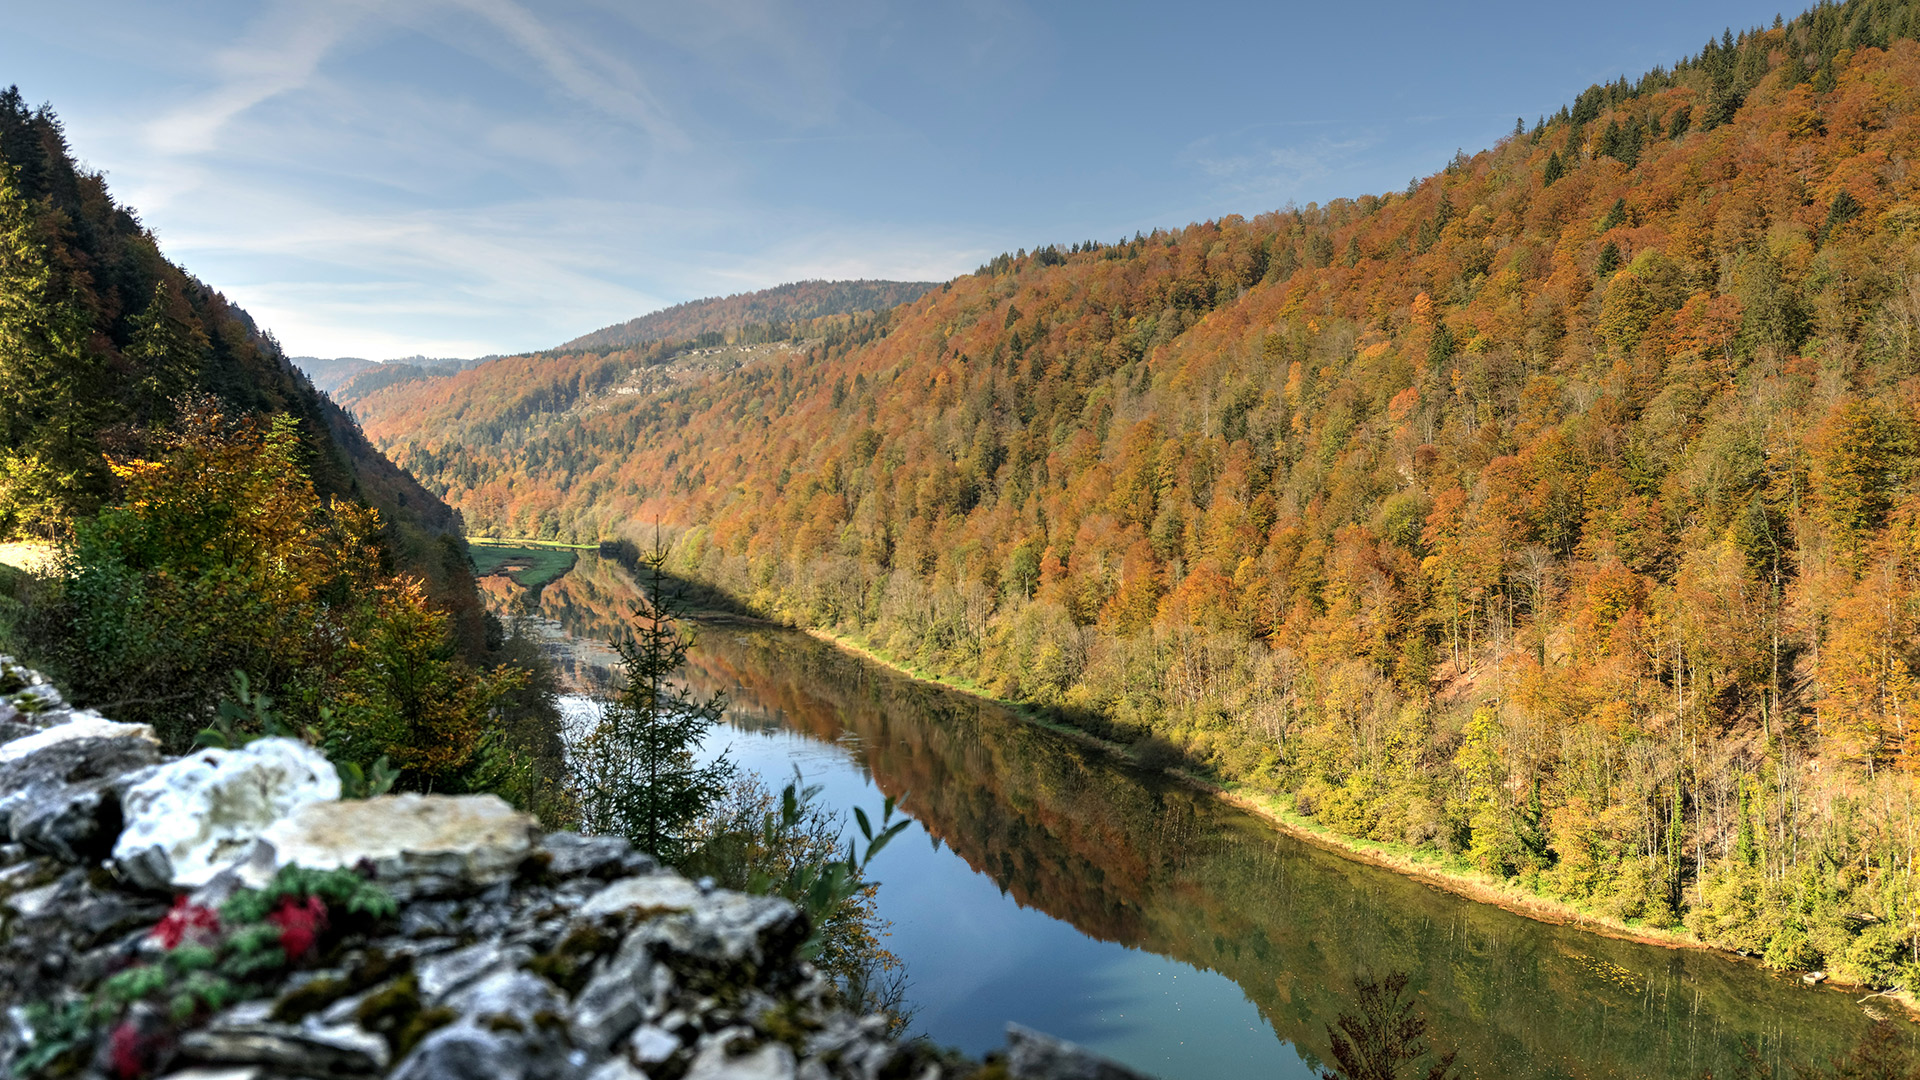 View of the river Doubs, Switzerland in autumn, near Le Noirmont